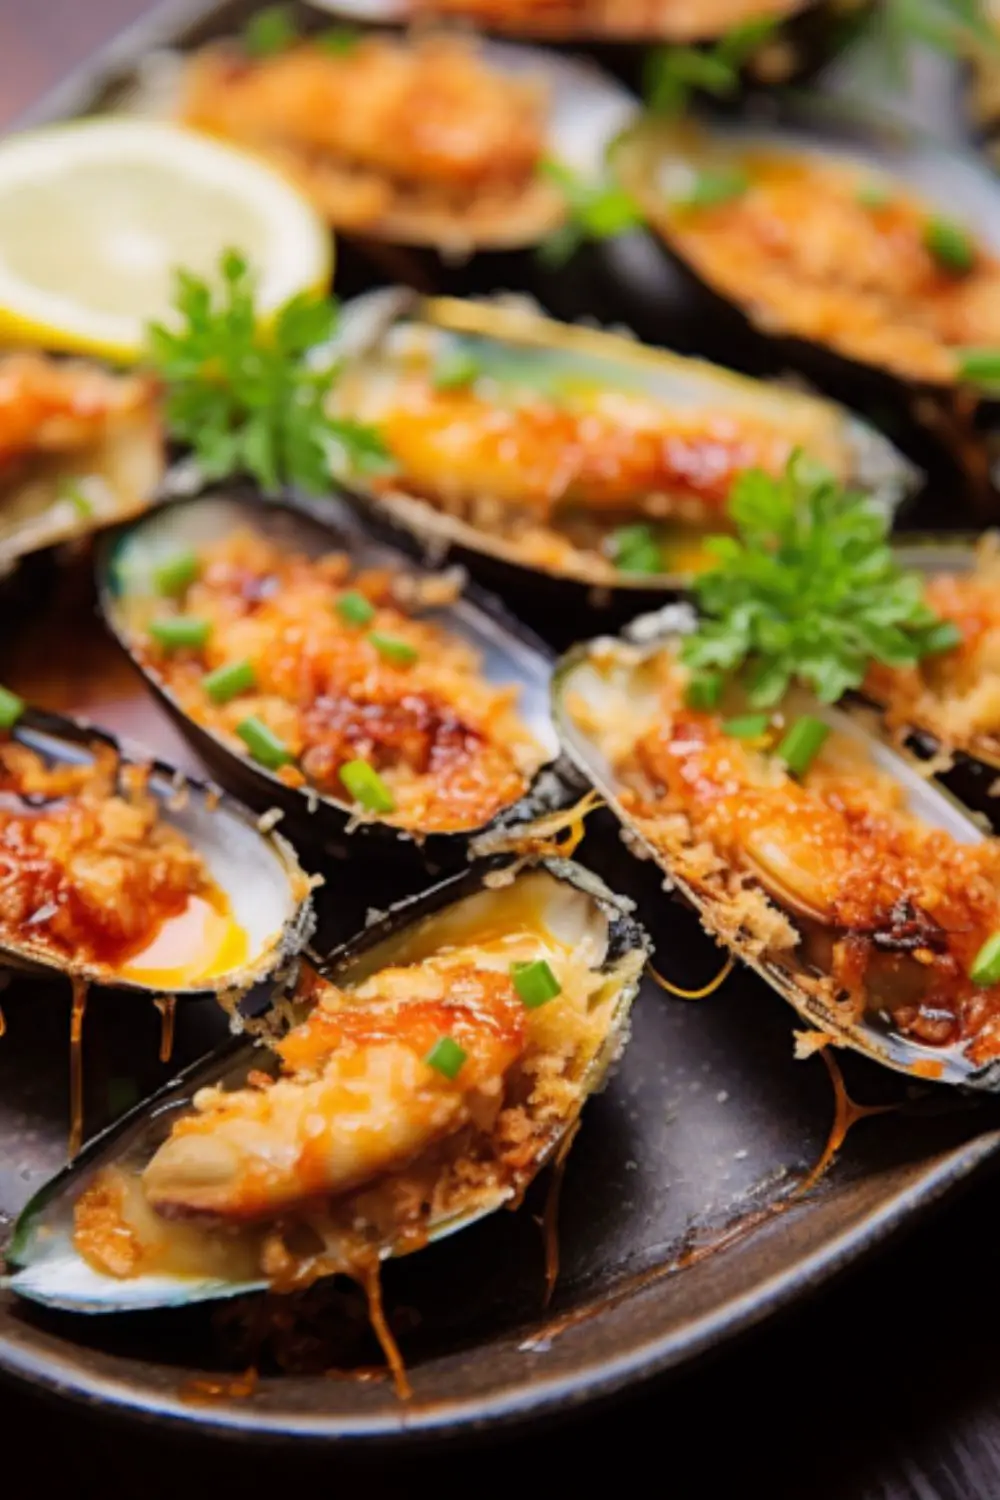 Japanese Baked Mussels Recipe